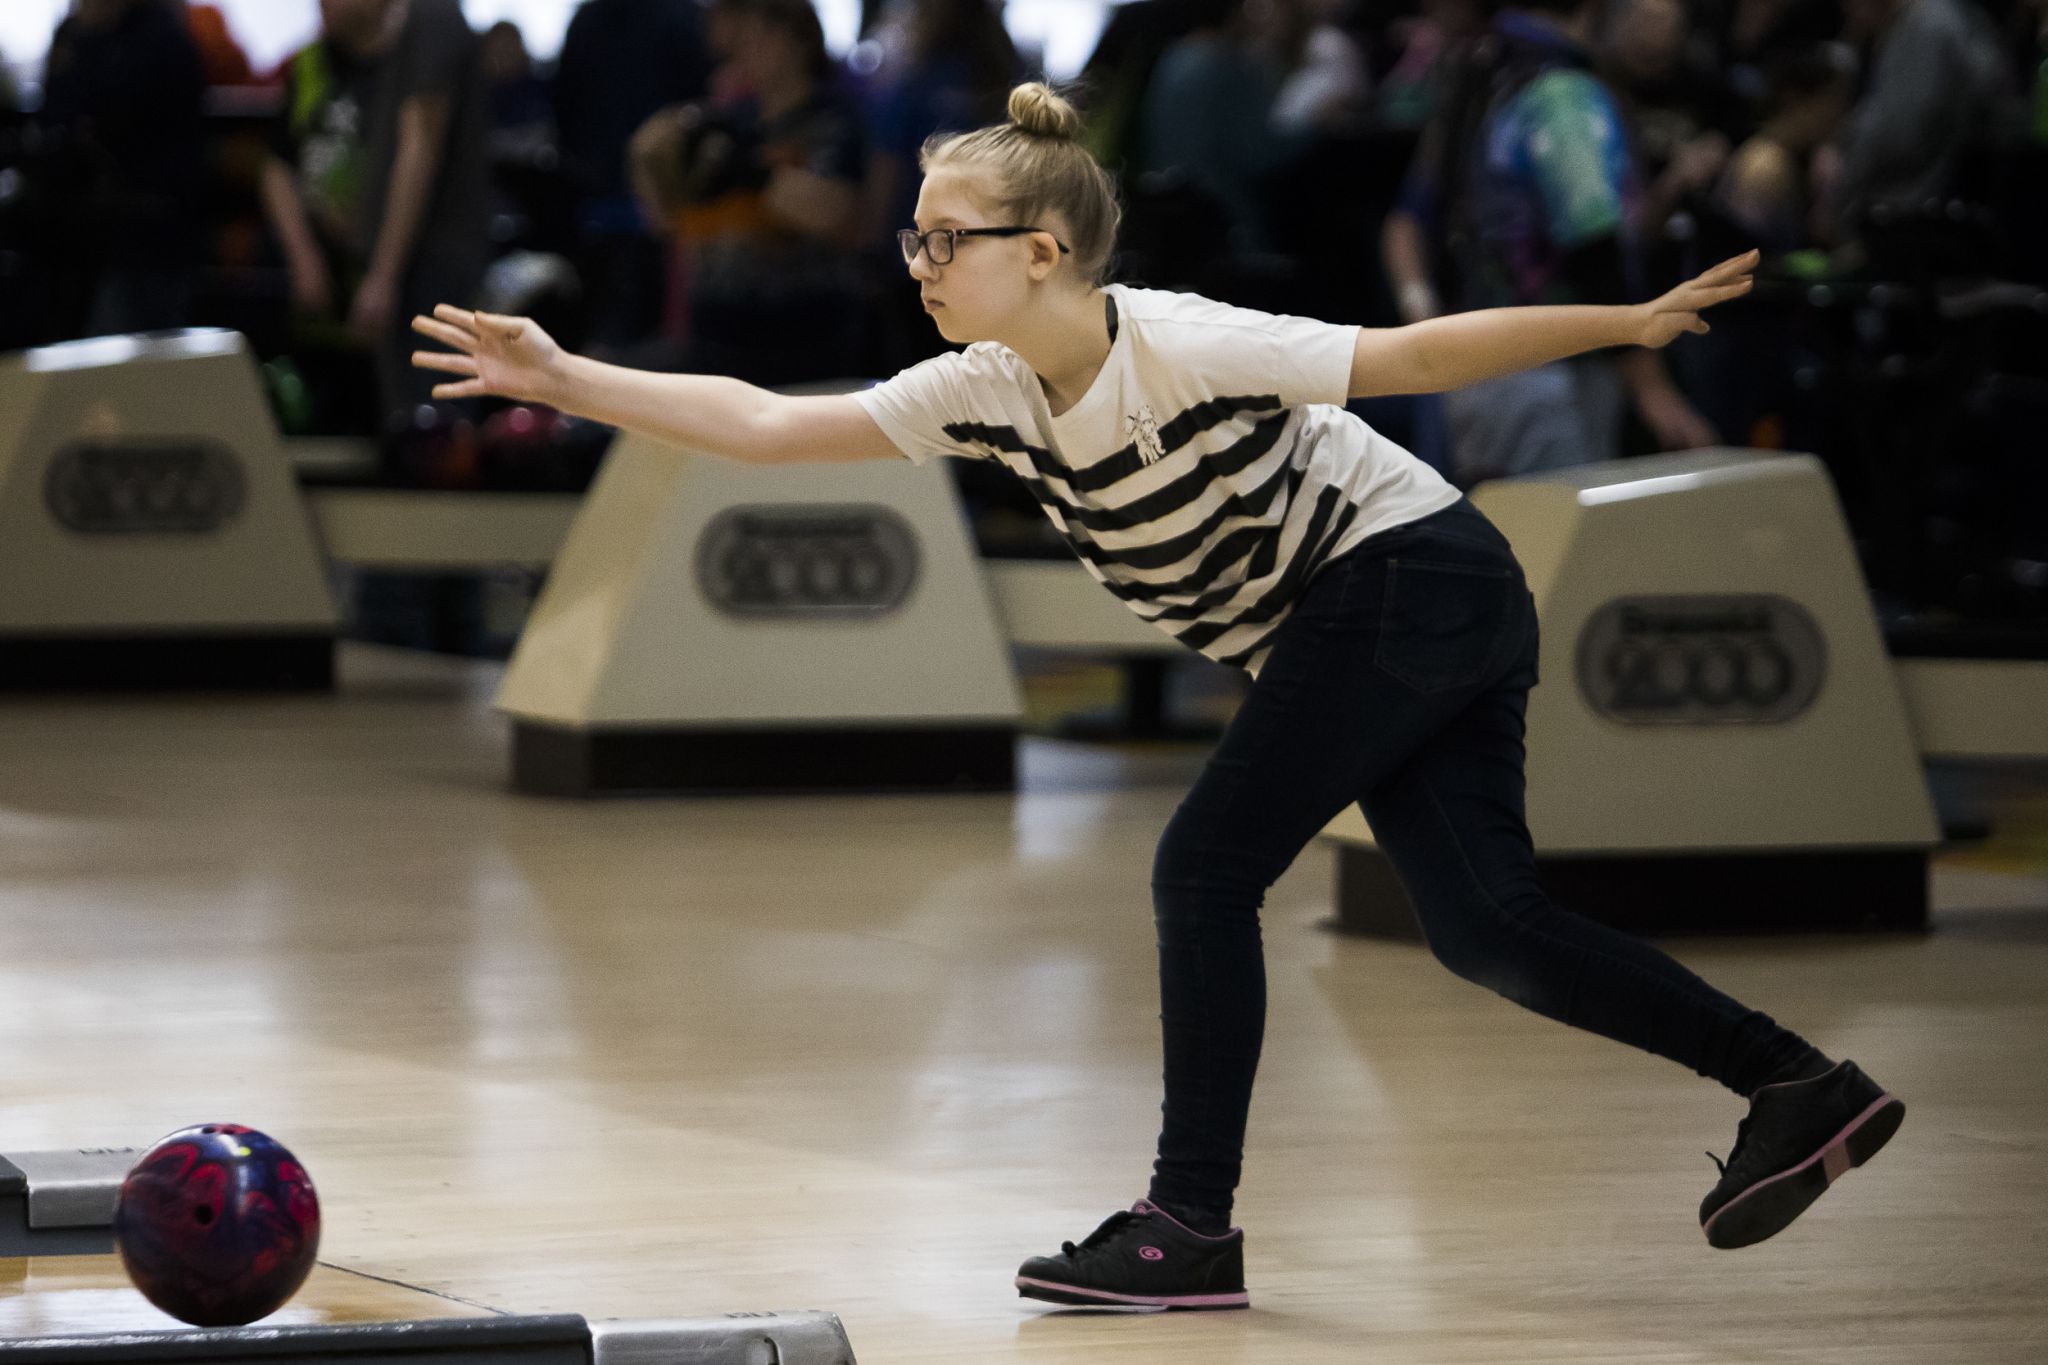 Northern Lanes to provide free bowling games to kids this summer